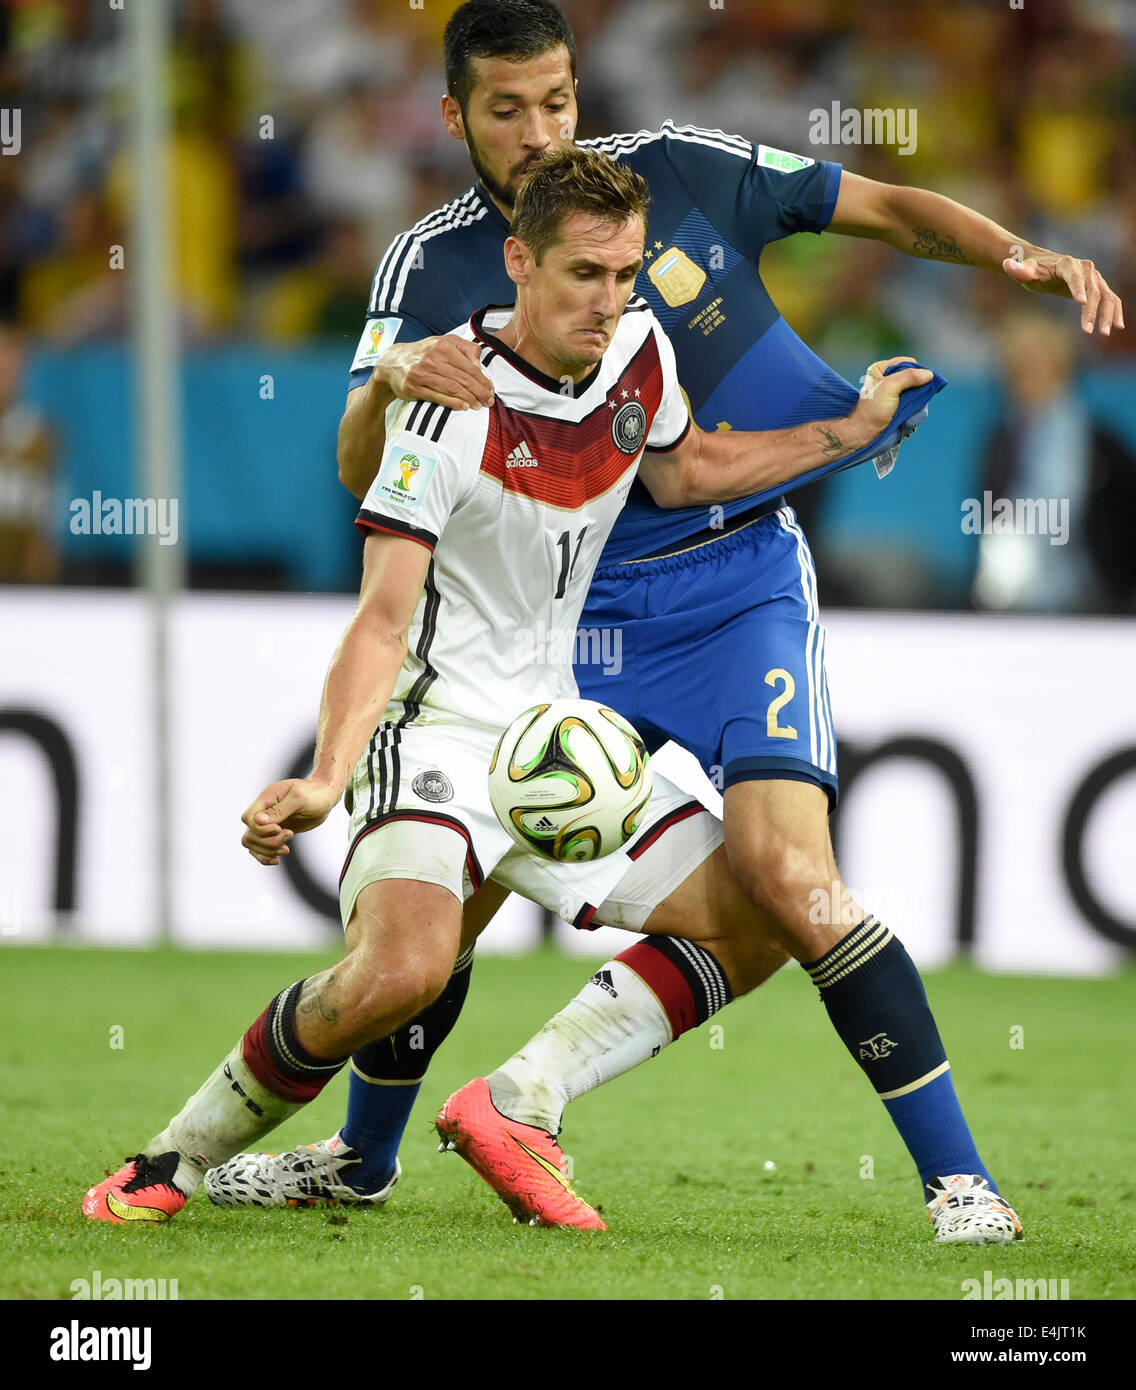 Rio de Janeiro, Brazil. 13th July, 2014. Miroslav Klose (front) of Germany and Ezequiel Garay of Argentina vie for the ball during the FIFA World Cup 2014 final soccer match between Germany and Argentina at the Estadio do Maracana in Rio de Janeiro, Brazil, 13 July 2014. Photo: Marcus Brandt/dpa/Alamy Live News Stock Photo